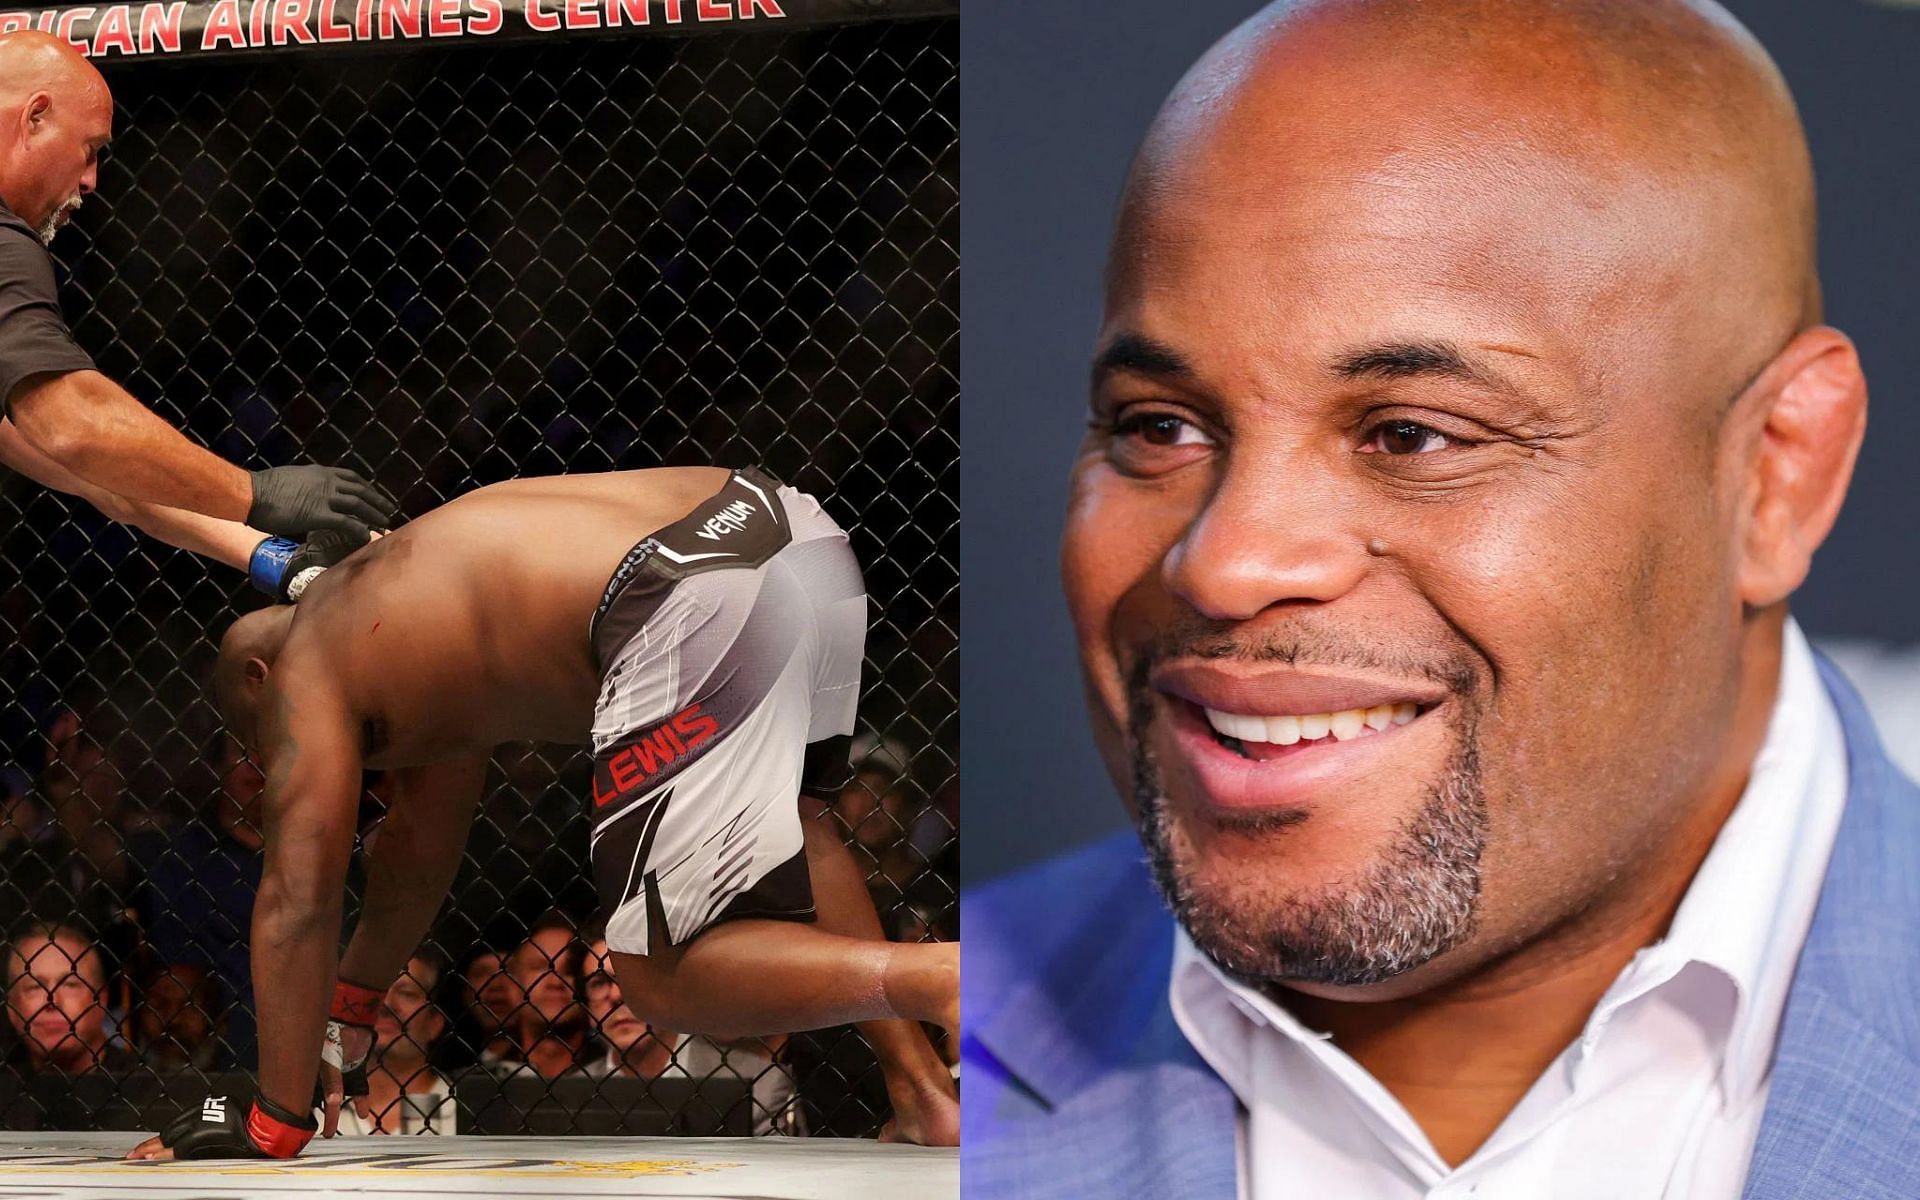 Derrick Lewis (left) and Daniel Cormier (right) [Images courtesy of Getty]